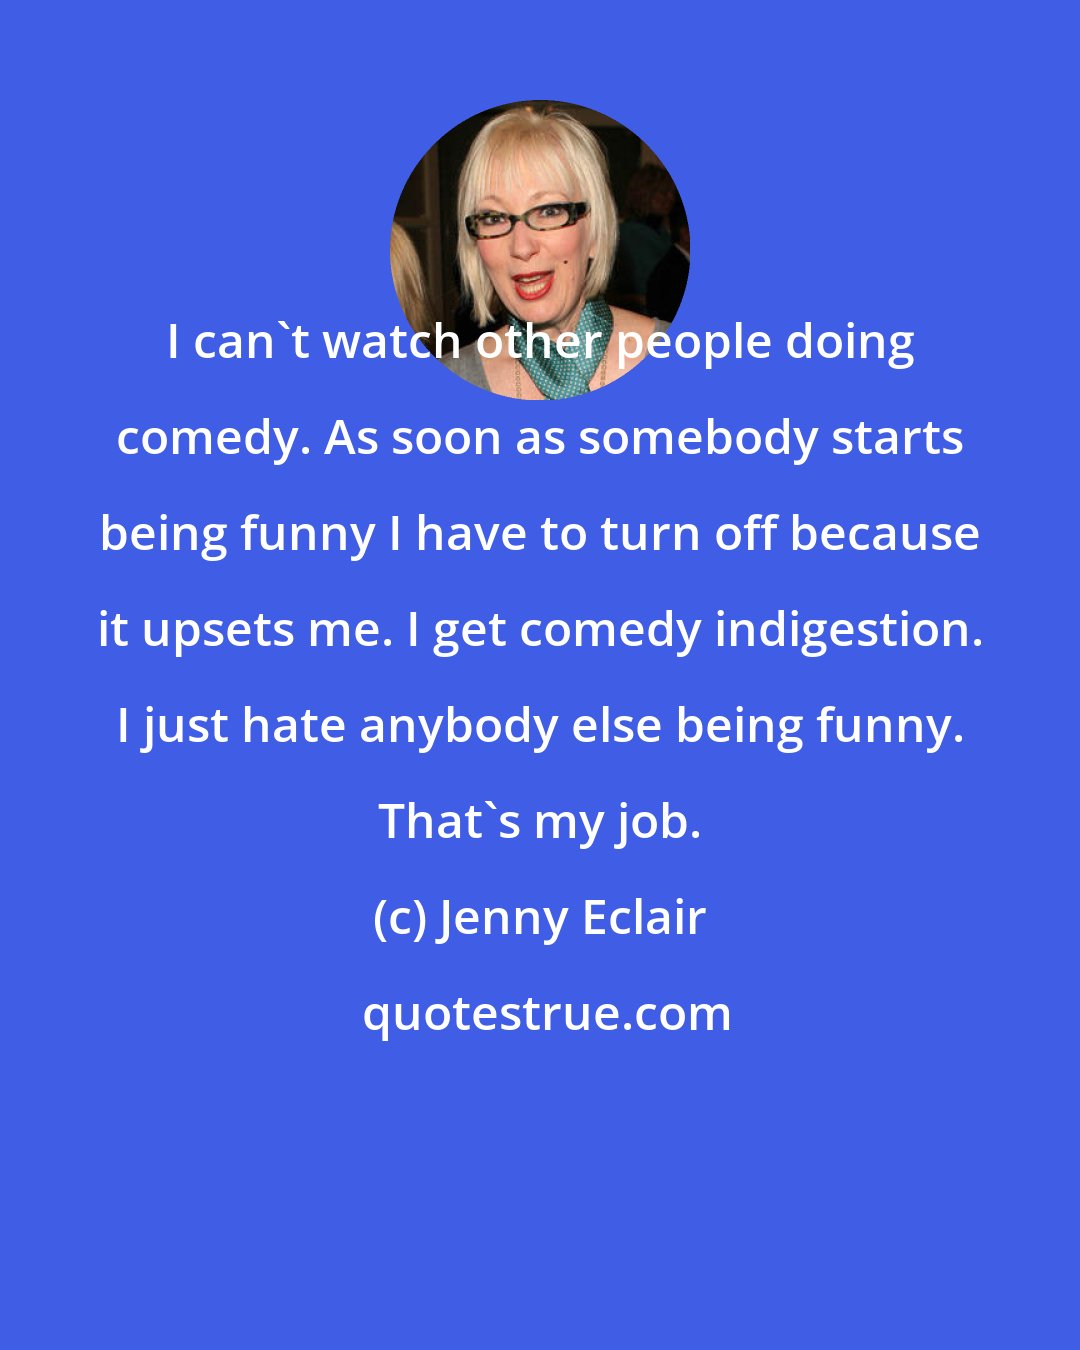 Jenny Eclair: I can't watch other people doing comedy. As soon as somebody starts being funny I have to turn off because it upsets me. I get comedy indigestion. I just hate anybody else being funny. That's my job.